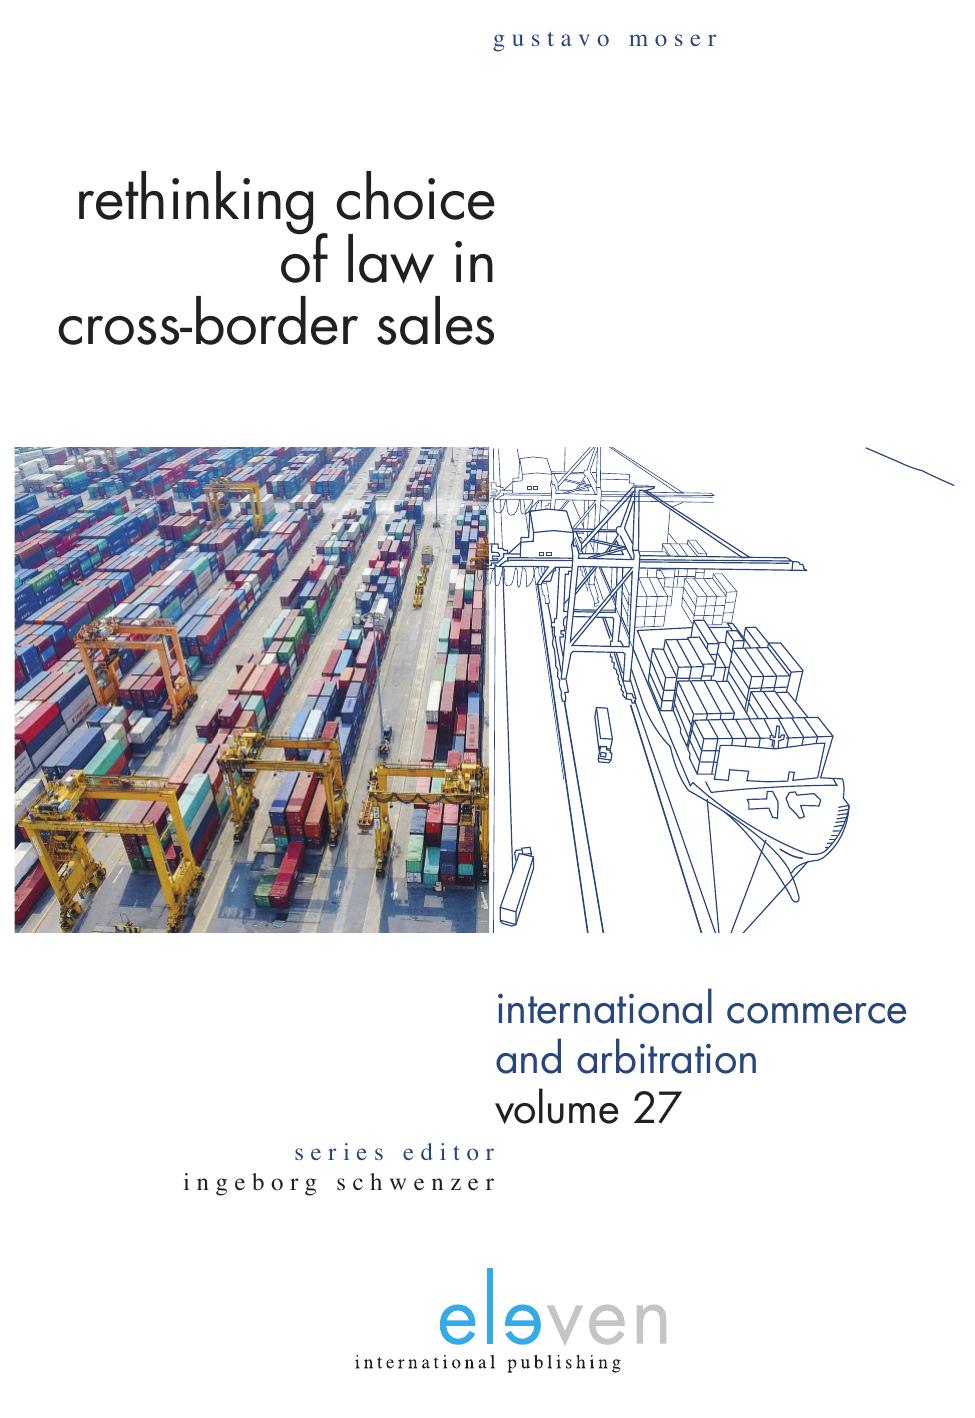 Rethinking Choice of Law in Cross-Border Sales by Gustavo Moser